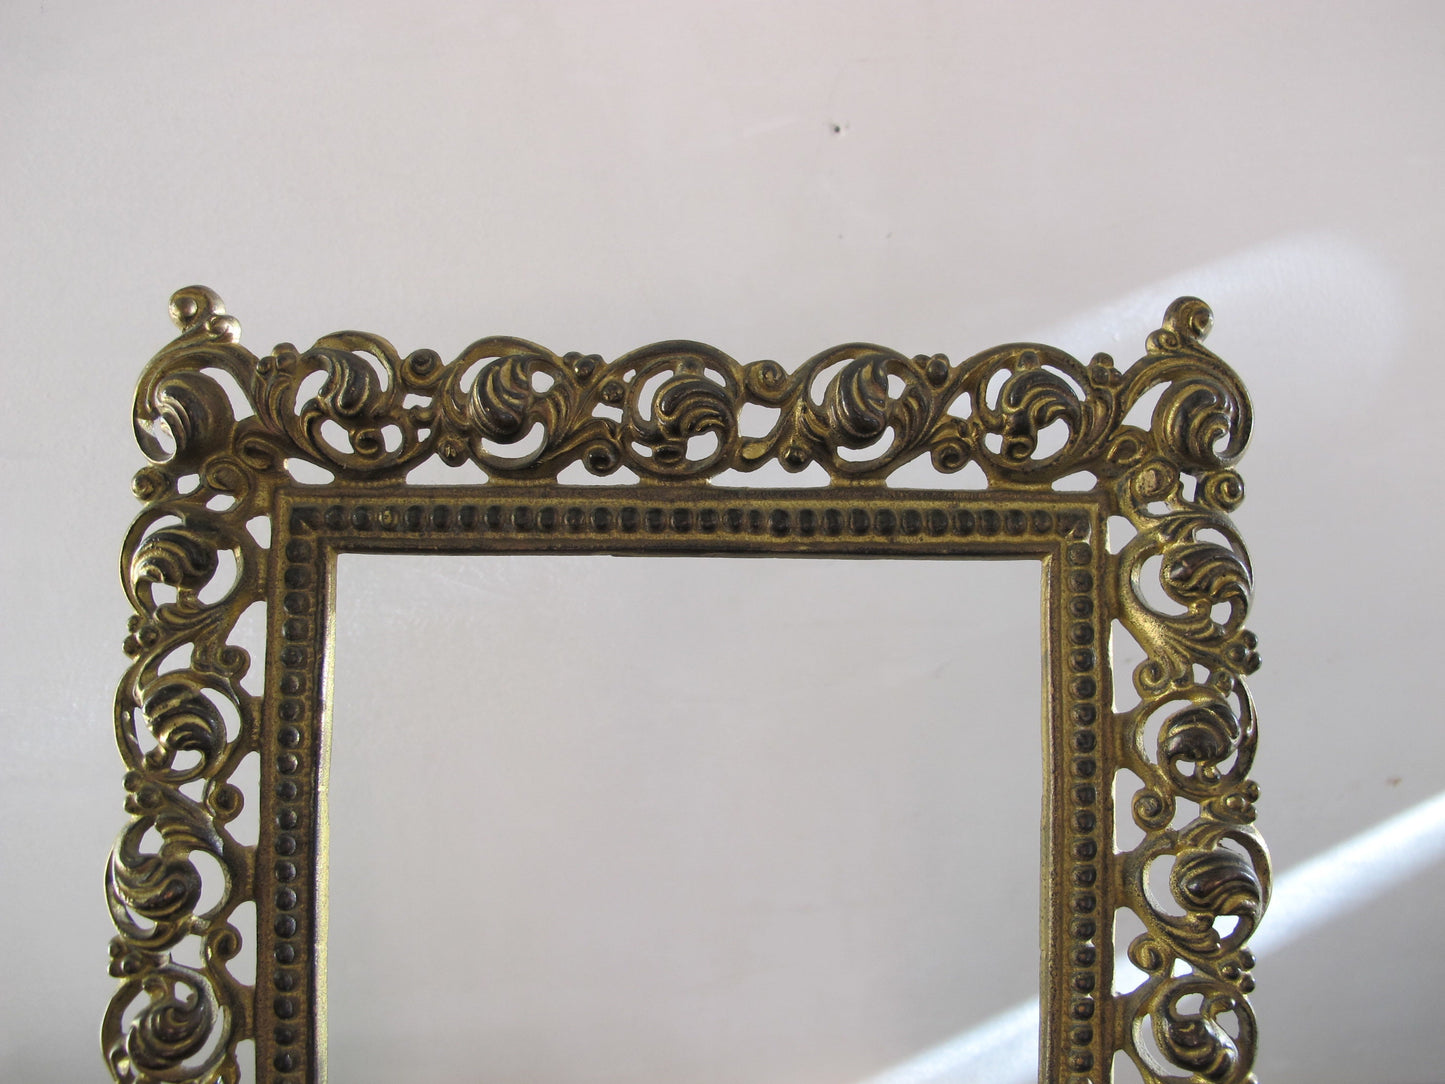 Frame Victorian Gilded Cast Iron Openwork Rococo Revival c. 1880 Original Surface Very Fine Casting